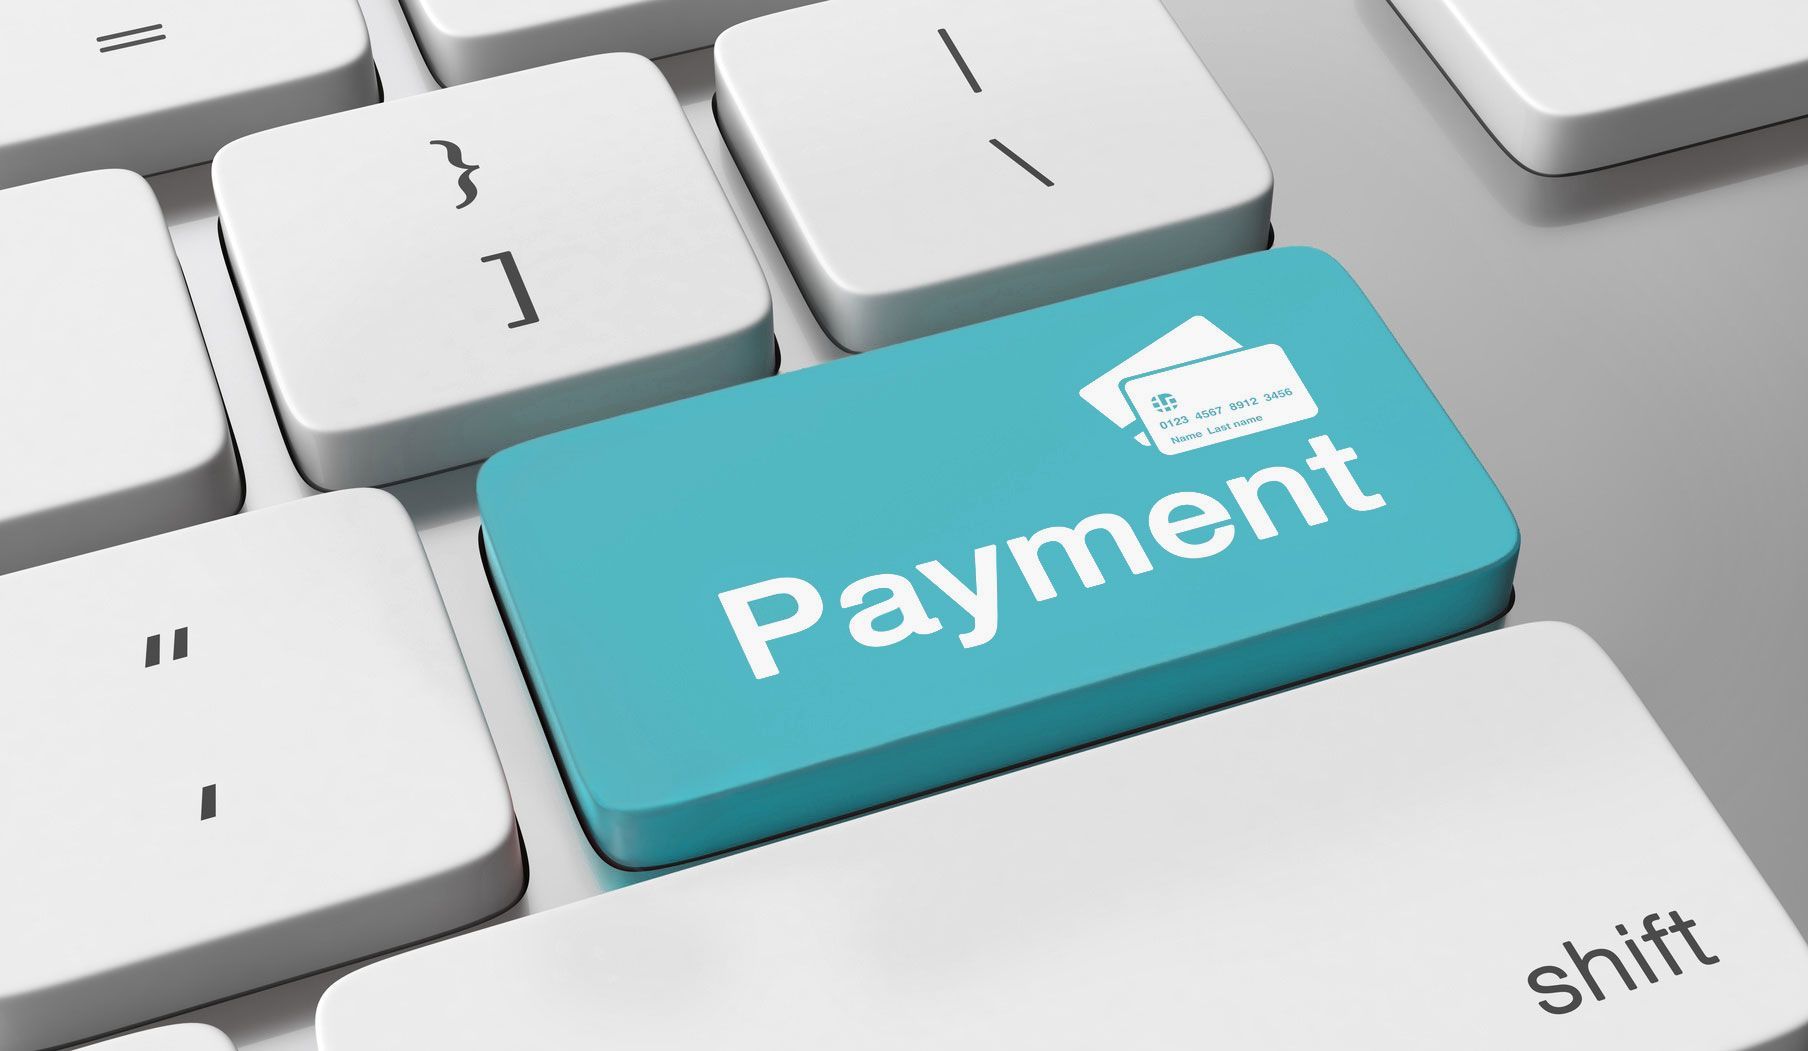 What payment methods are supported?